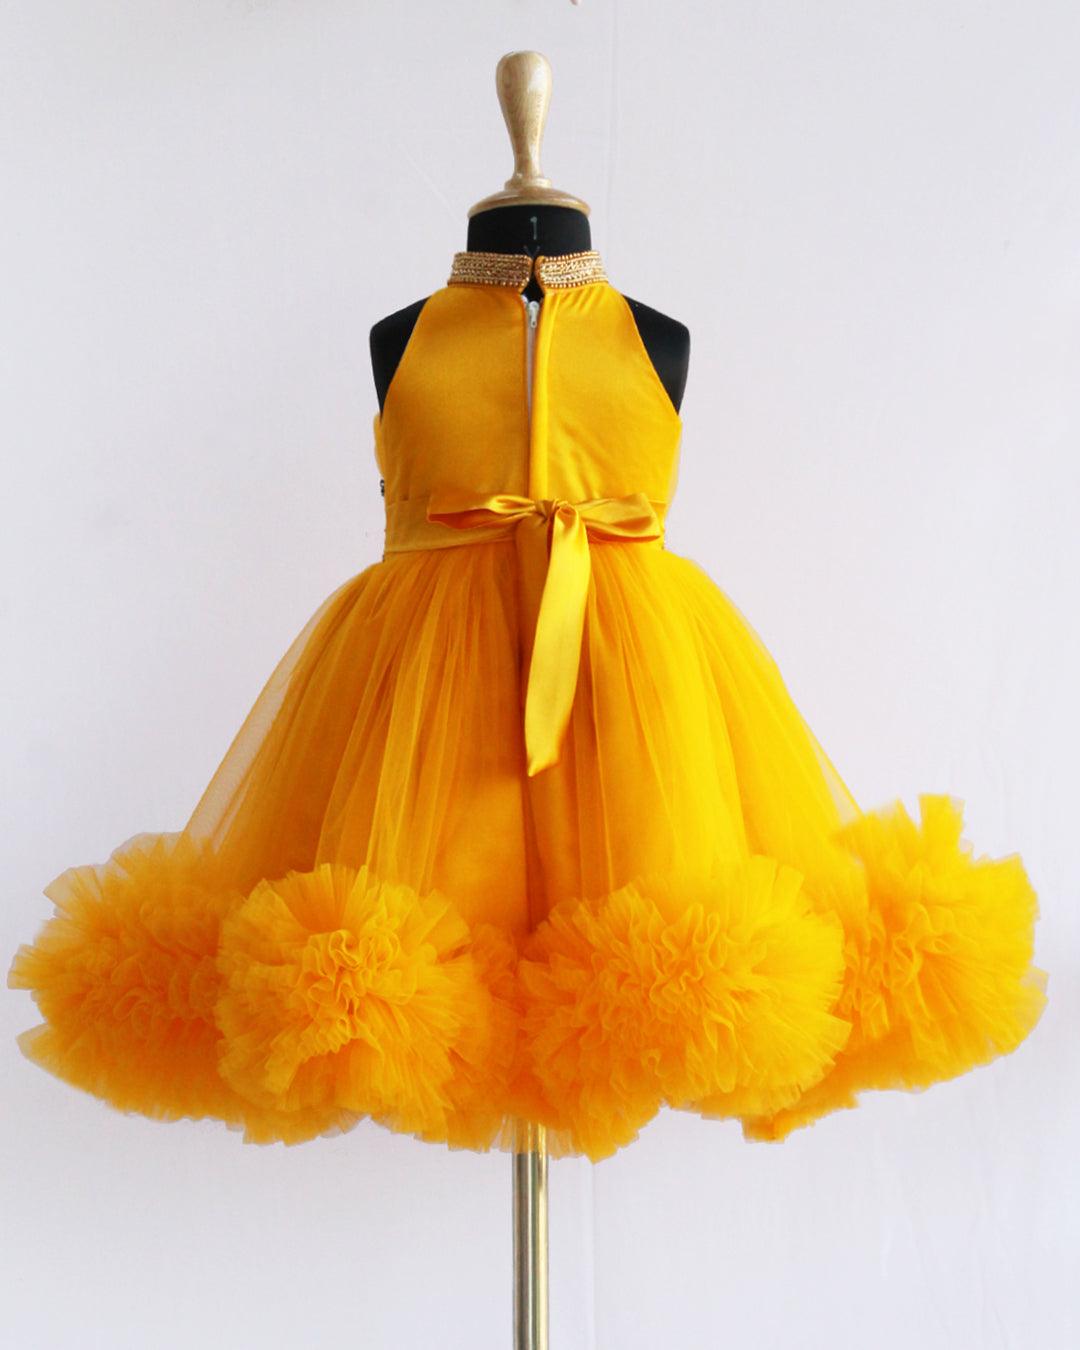 Mango Yellow Pleated Halter Neck Ruffled Frock.
Material : Mango Yellow  soft mono nylon net is mainly used for making this dress. Yoke portion is designed in a pleated pattern with halter neck design. Skirt port